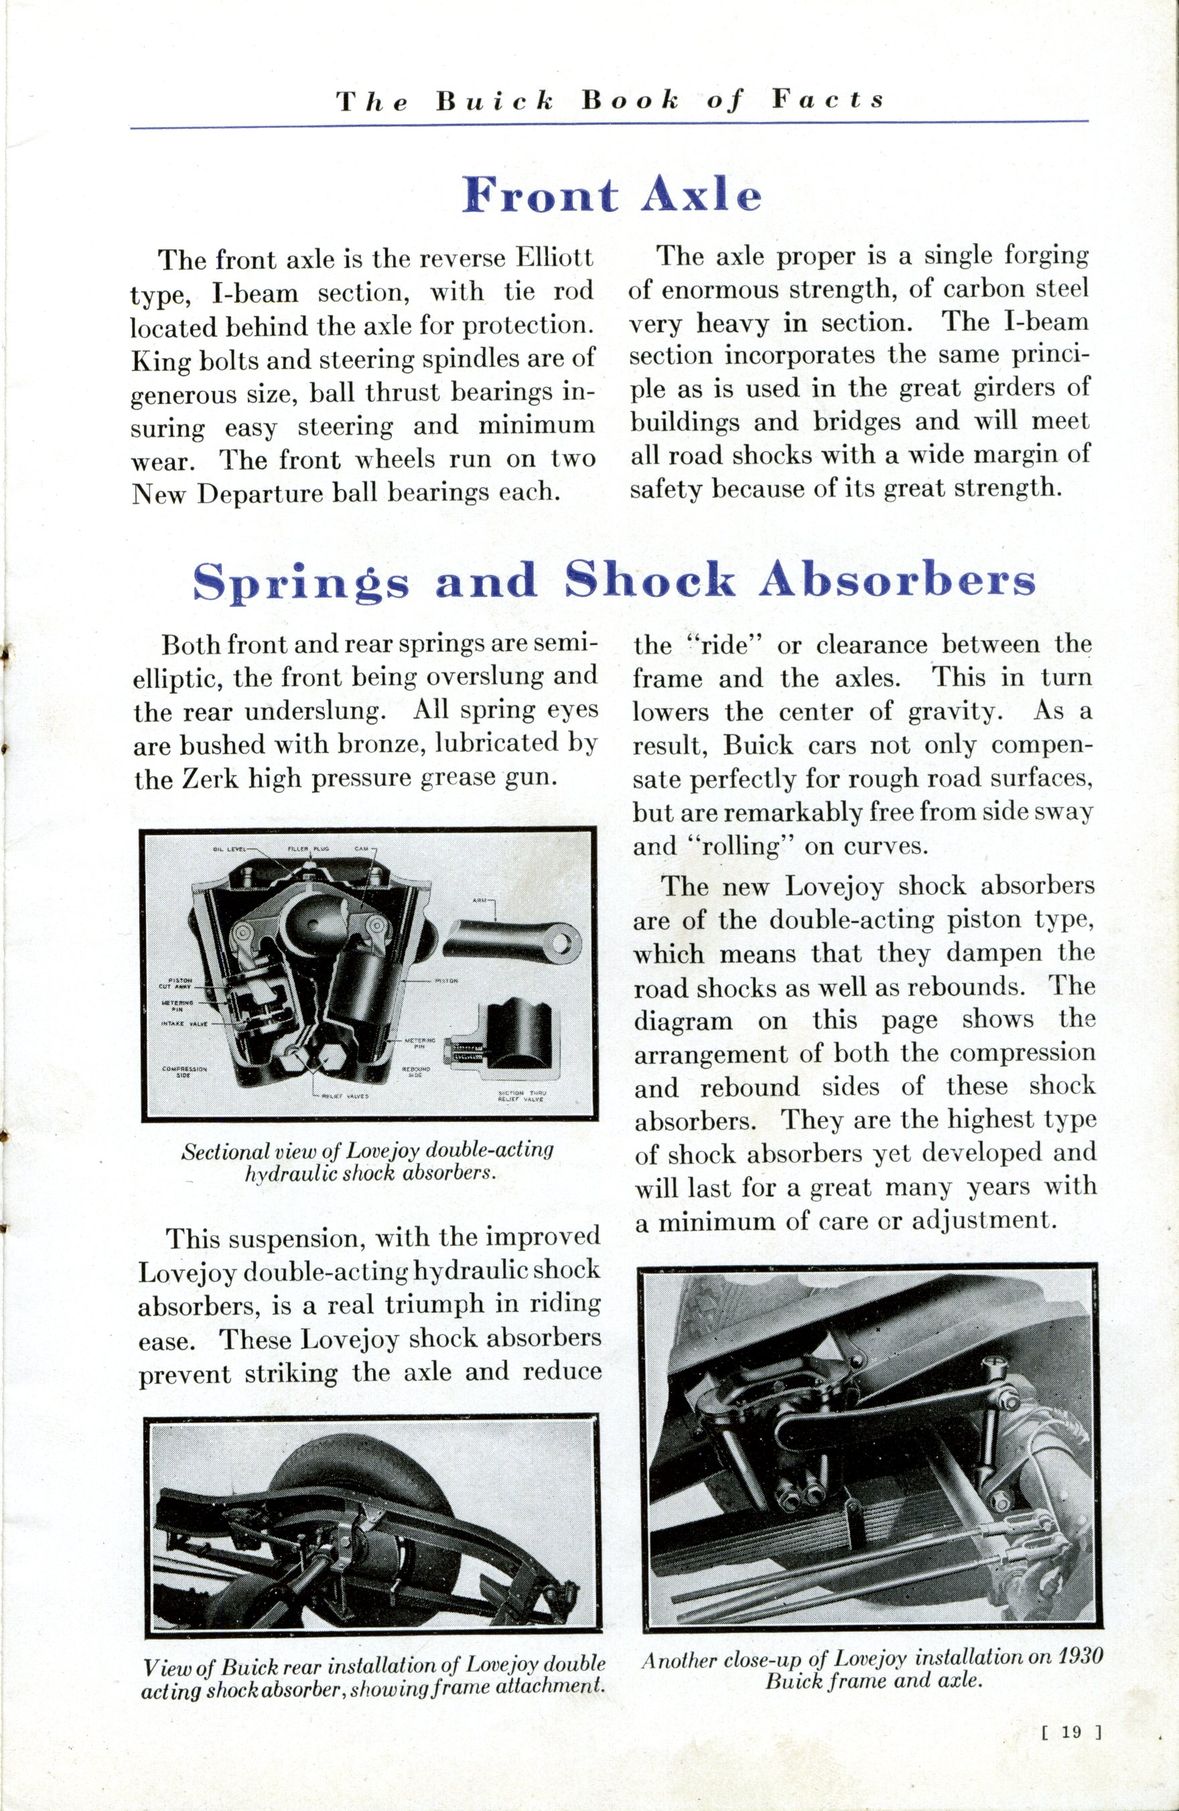 1930 Buick Book of Facts-19